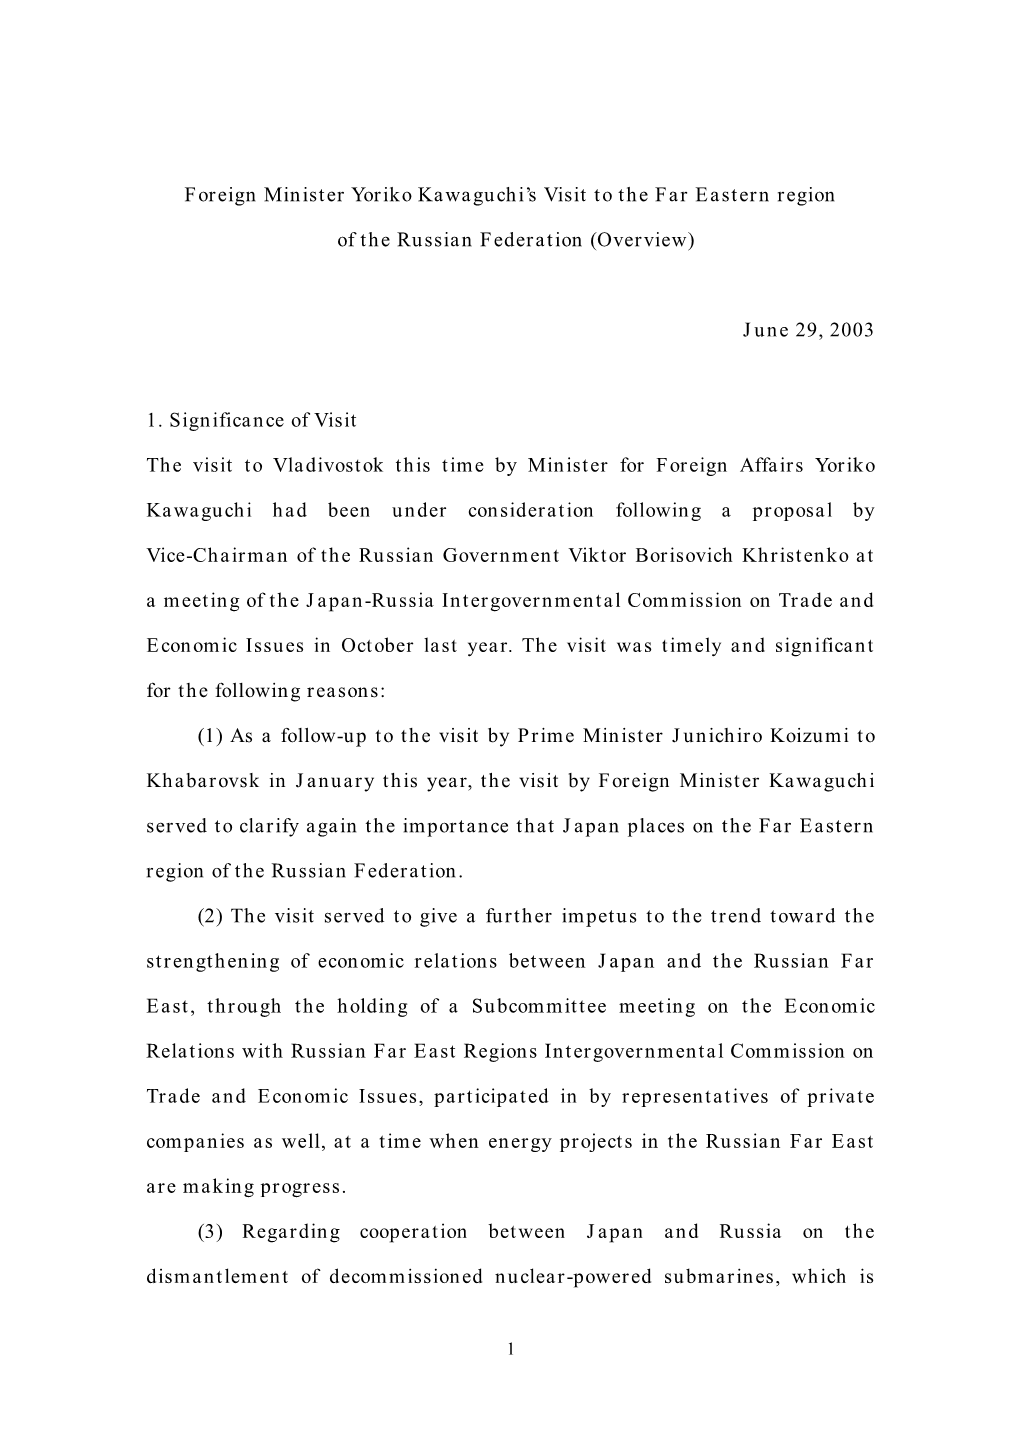 Foreign Minister Yoriko Kawaguchi's Visit to the Far Eastern Region of the Russian Federation (Overview) June 29, 2003 1. Sign